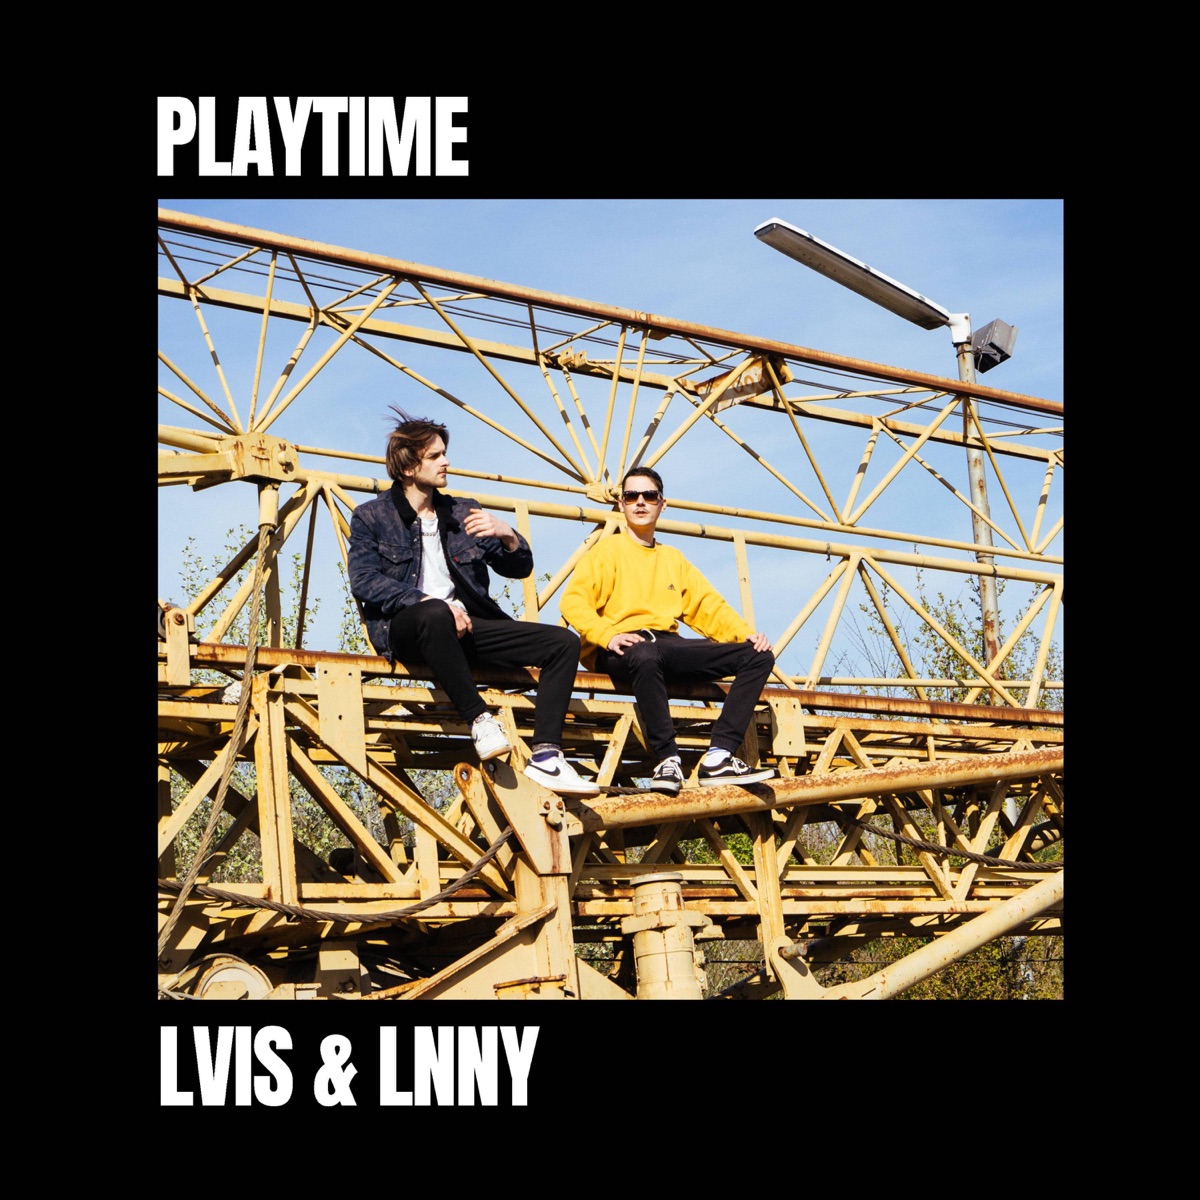 PROJECT PLAYTIME - EP - Album by LNNY & LVIS - Apple Music